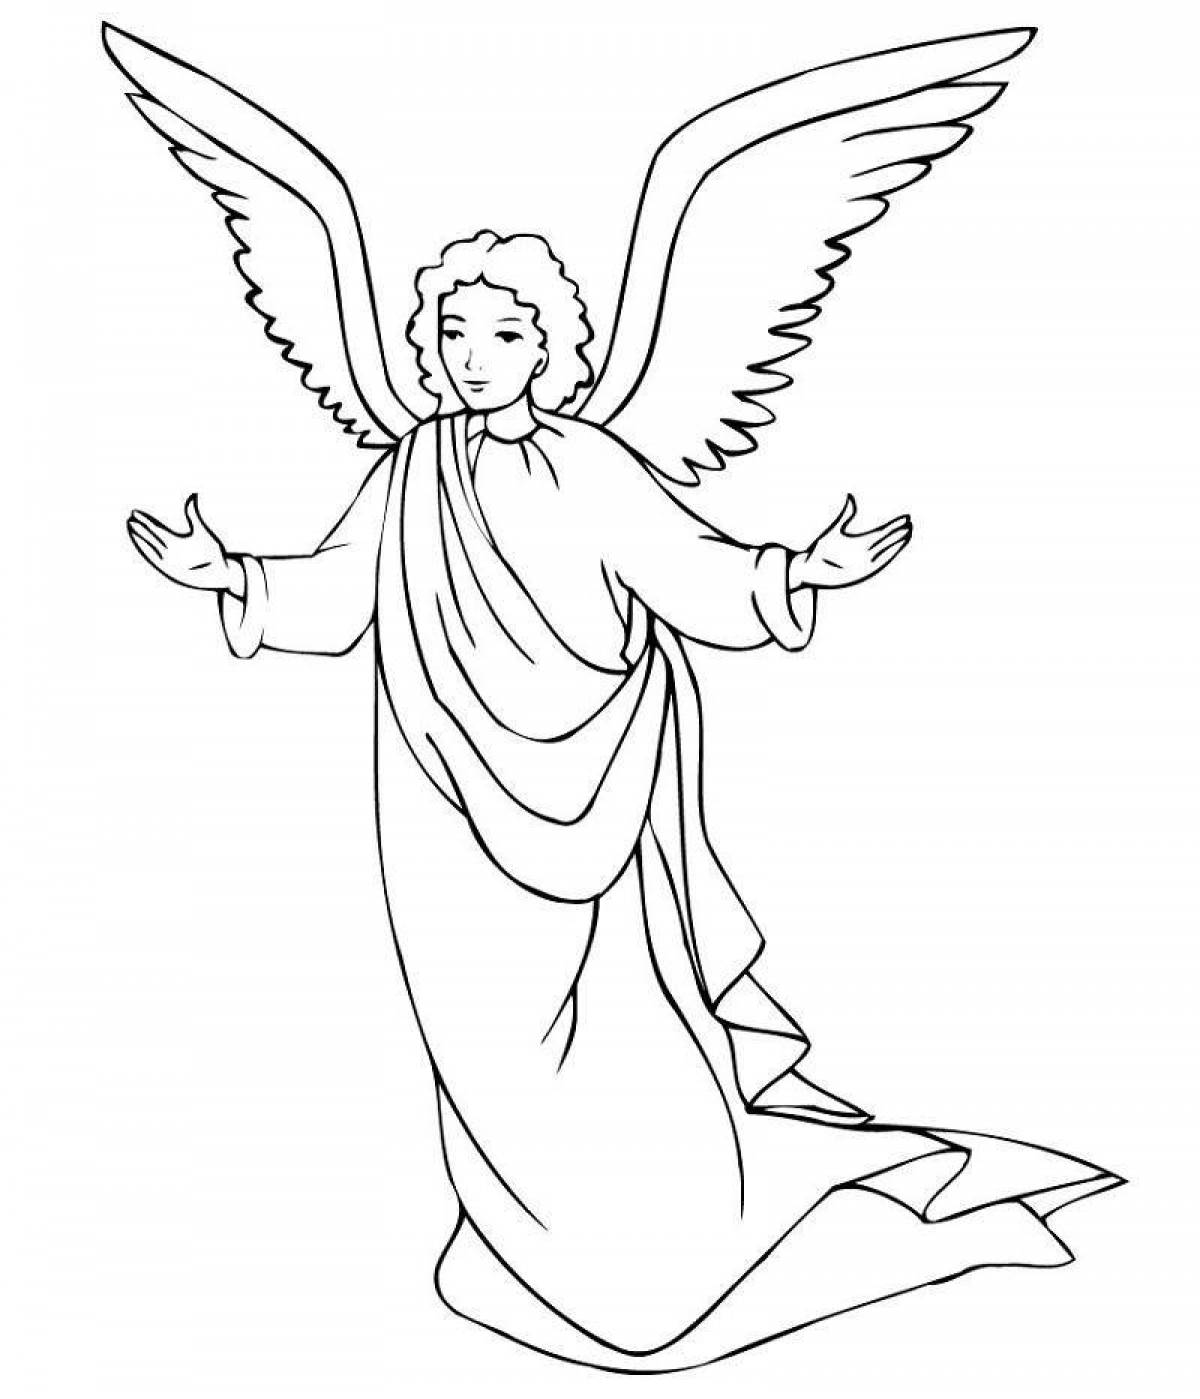 Celestial angel coloring book for kids